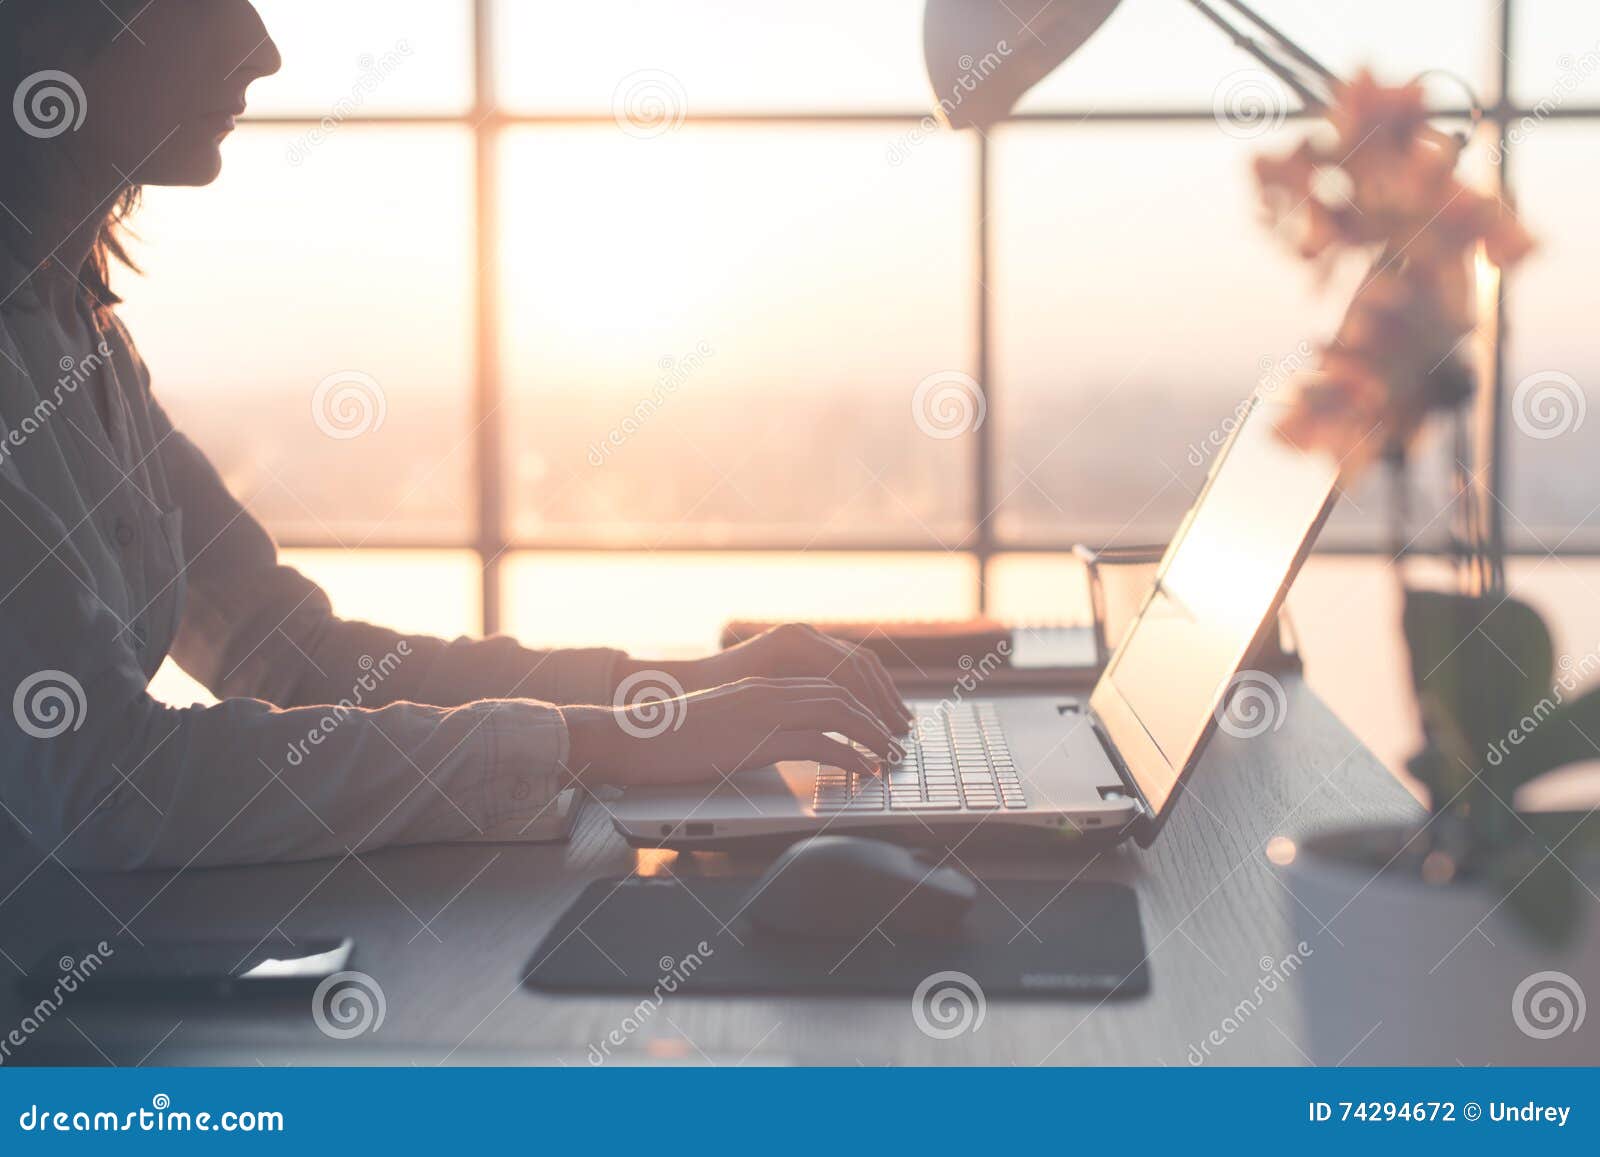 adult businesswoman working at home using computer, studying business ideas on a pc screen